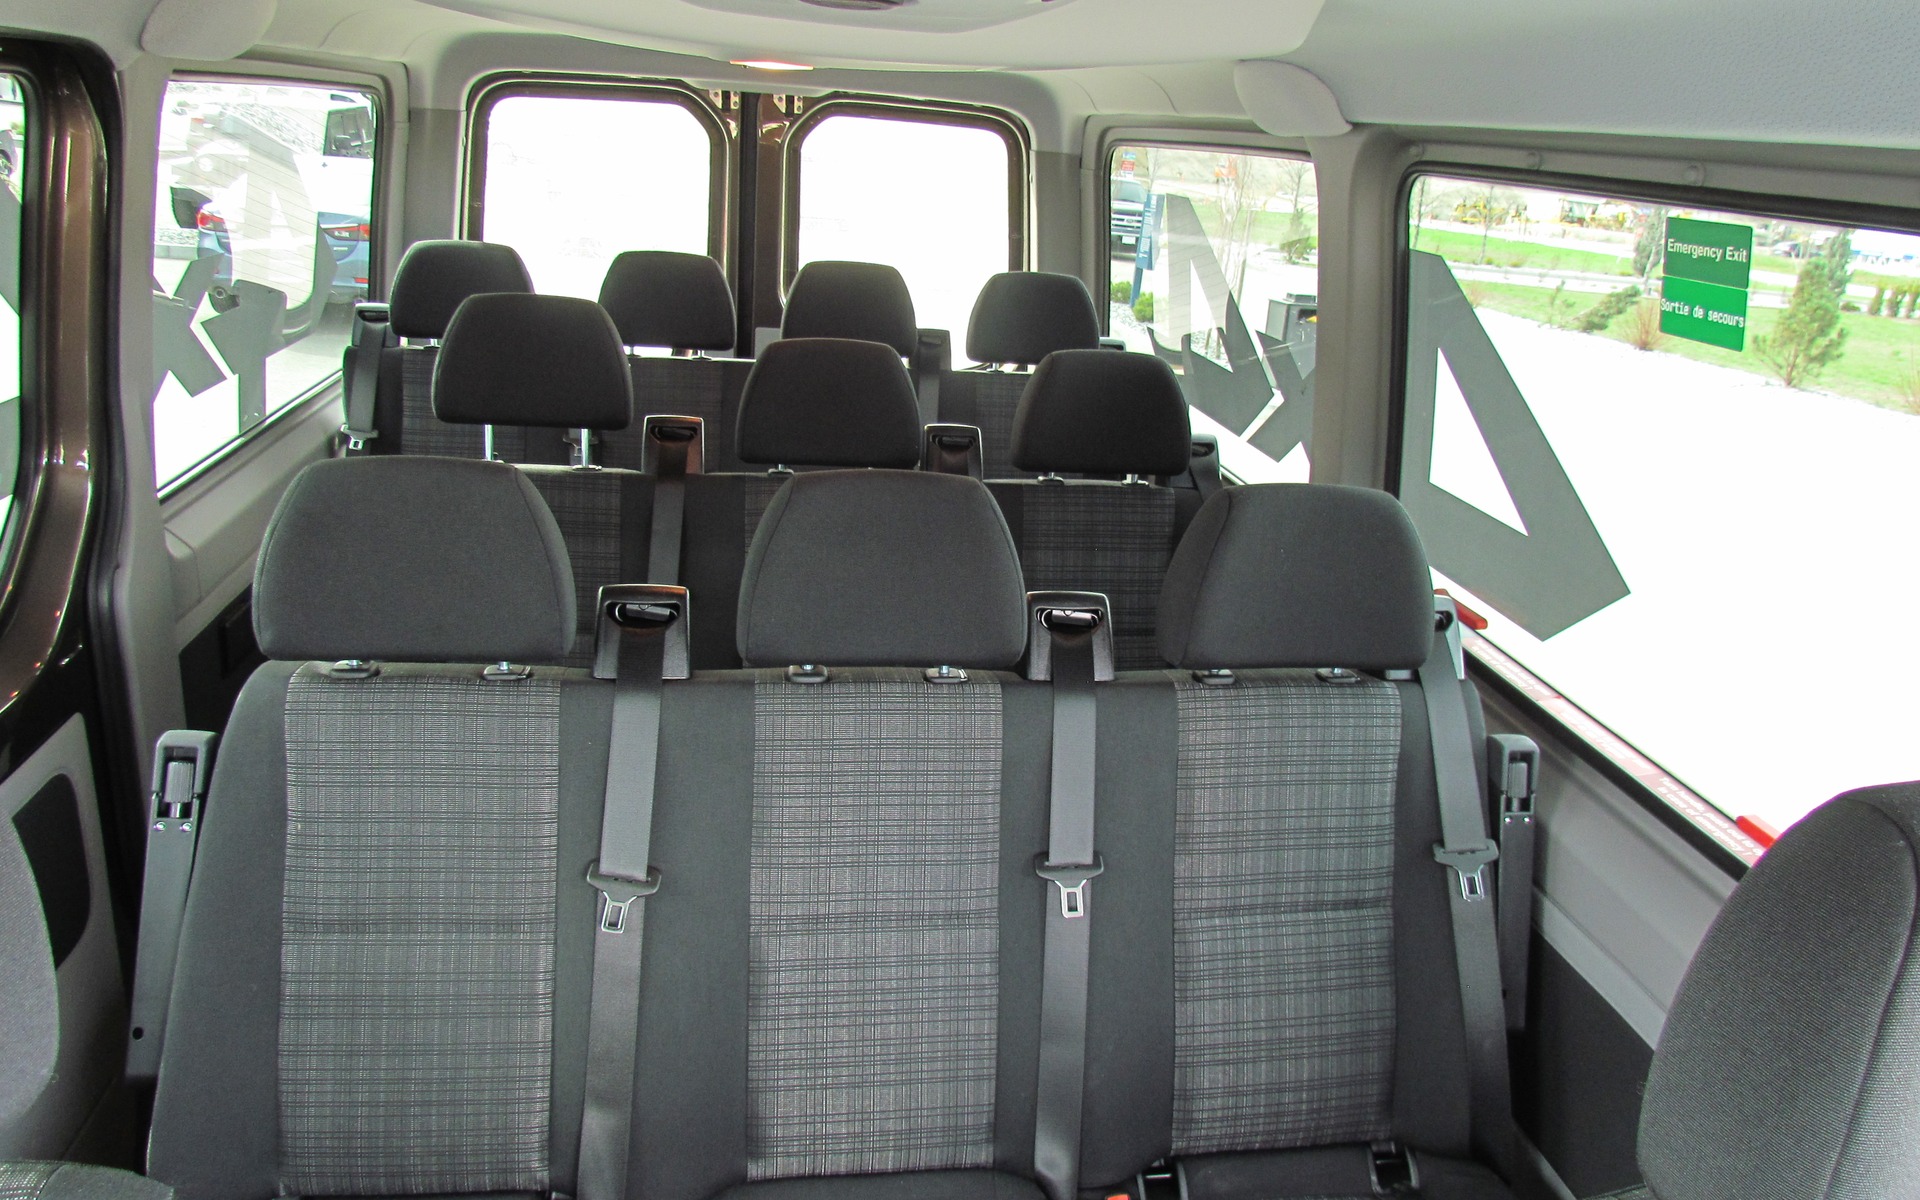 You can choose from cargo or passenger models (up to 12 passengers).